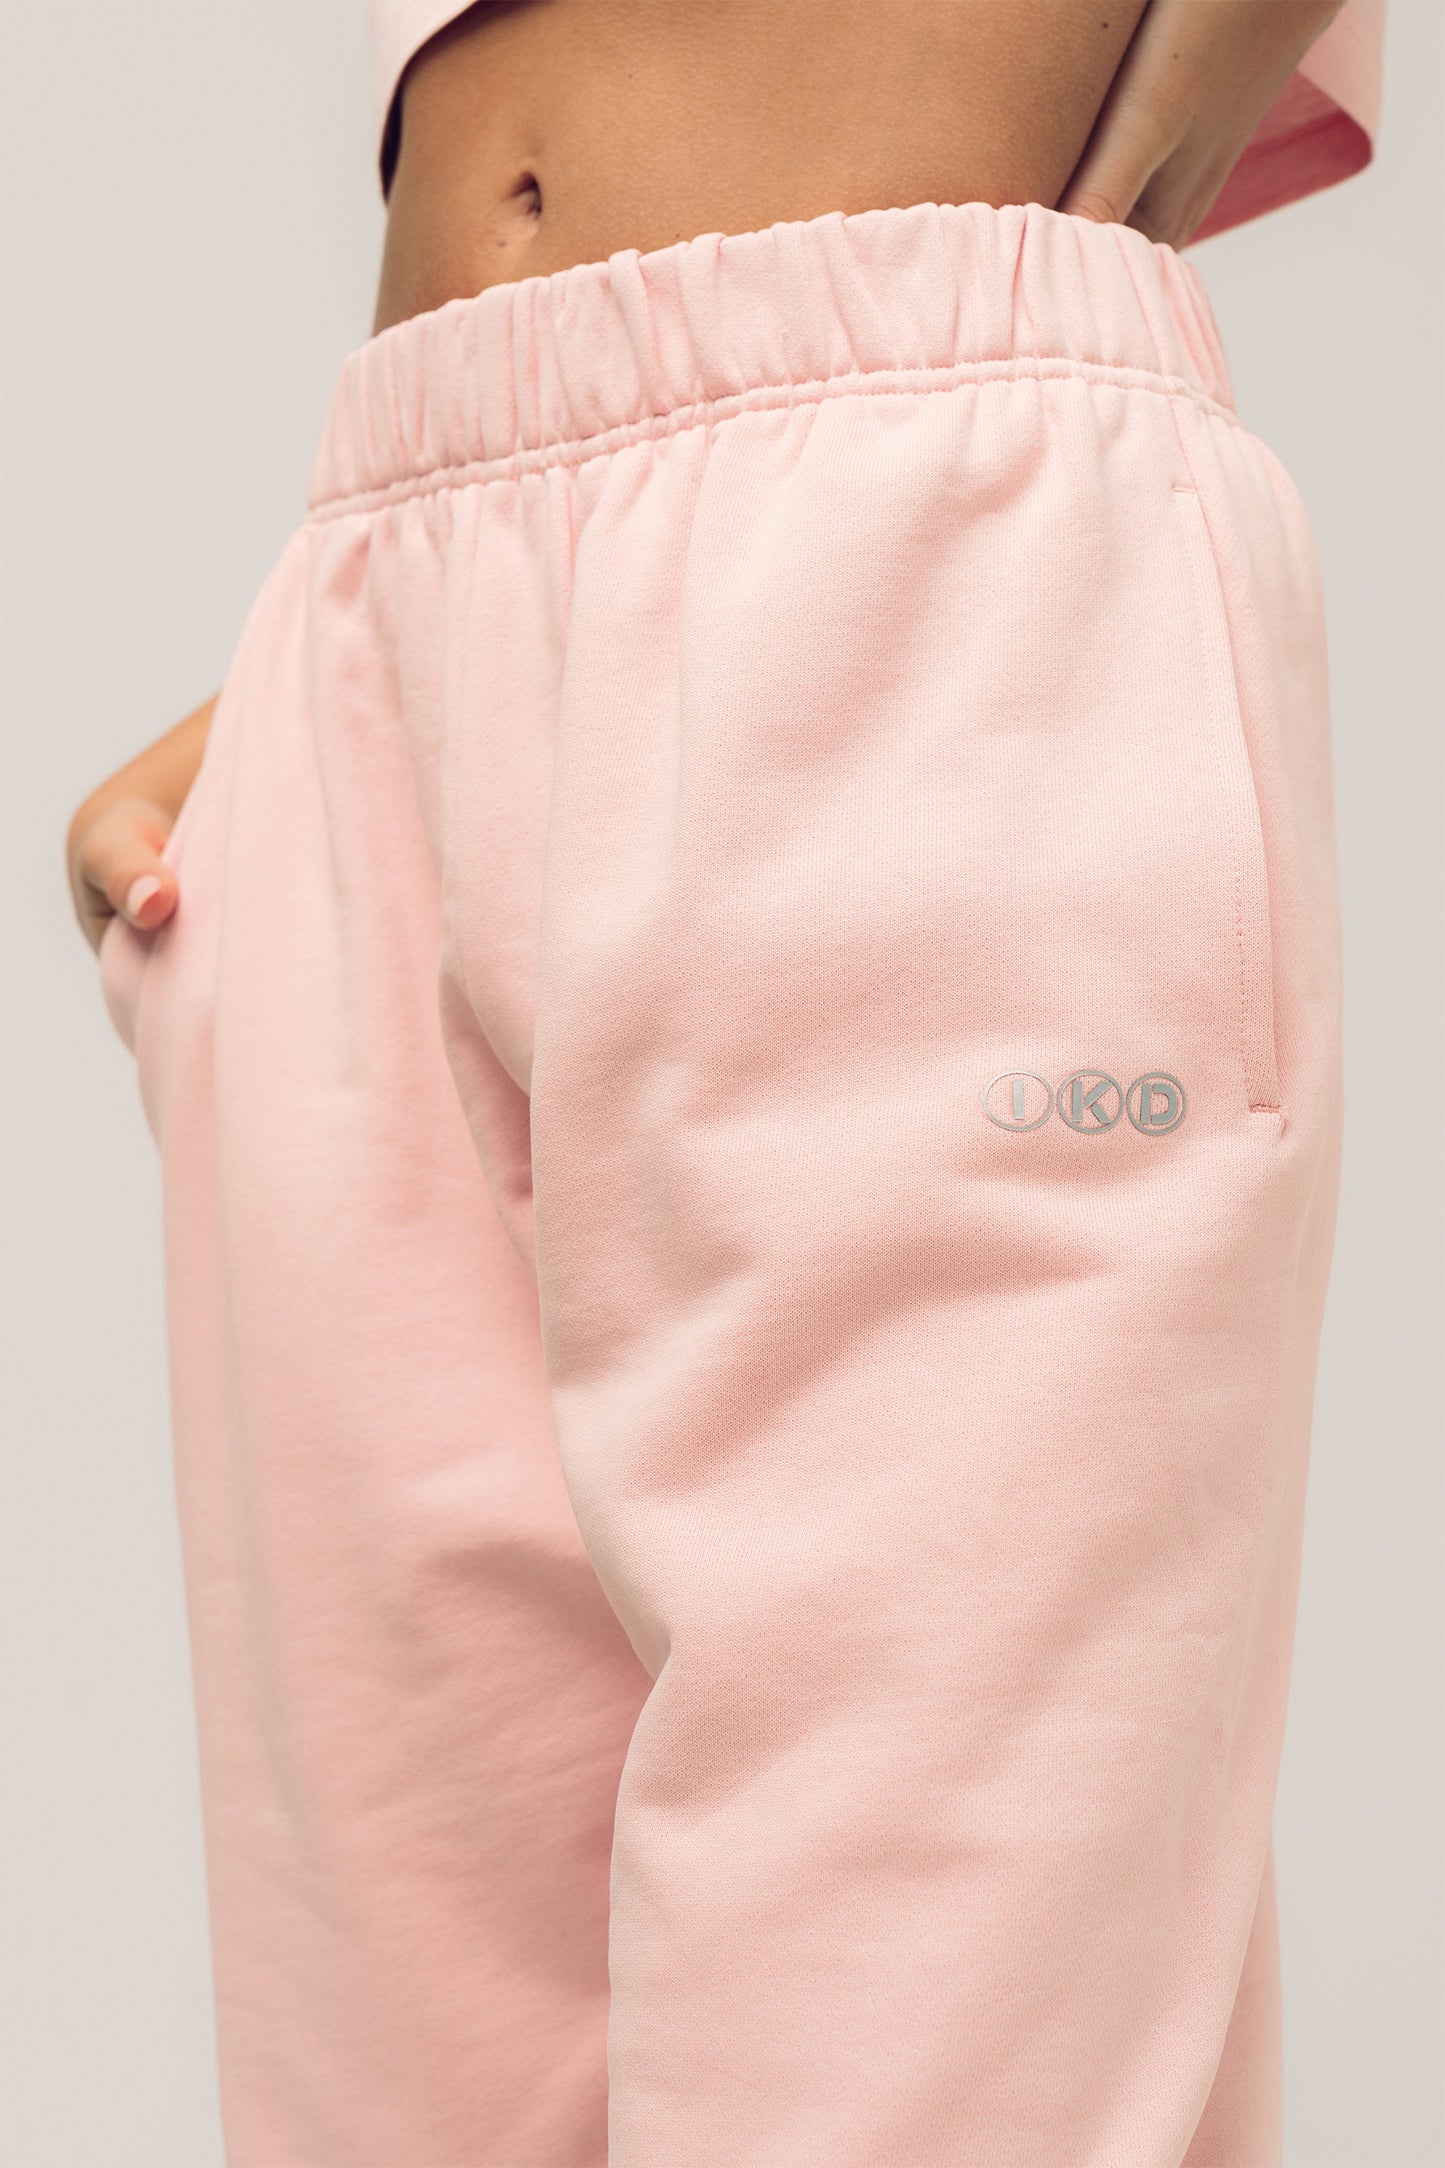 Stay Stylish and Comfy with It Girl Sweatpants - IKD Active